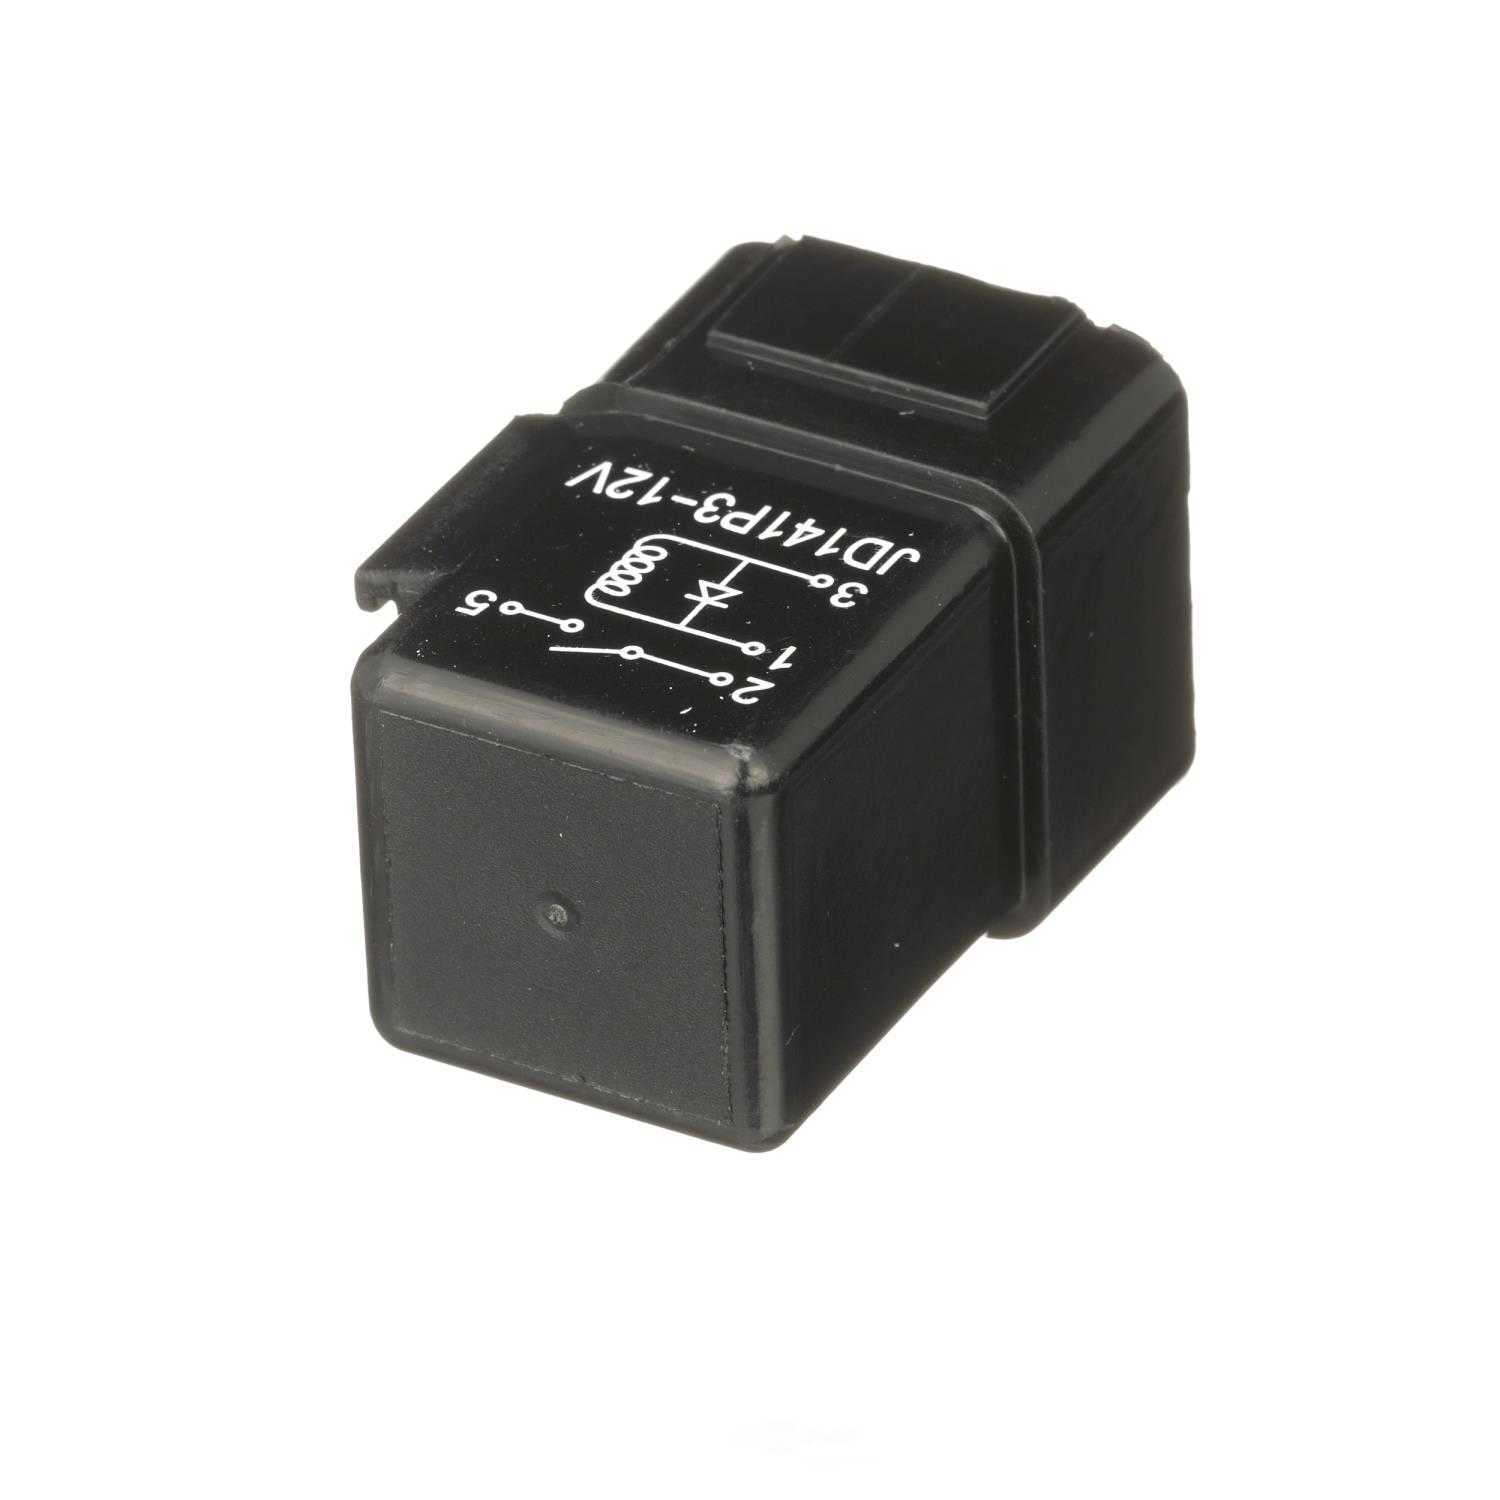 STANDARD MOTOR PRODUCTS - Idle Up Relay Solenoid - STA RY-27